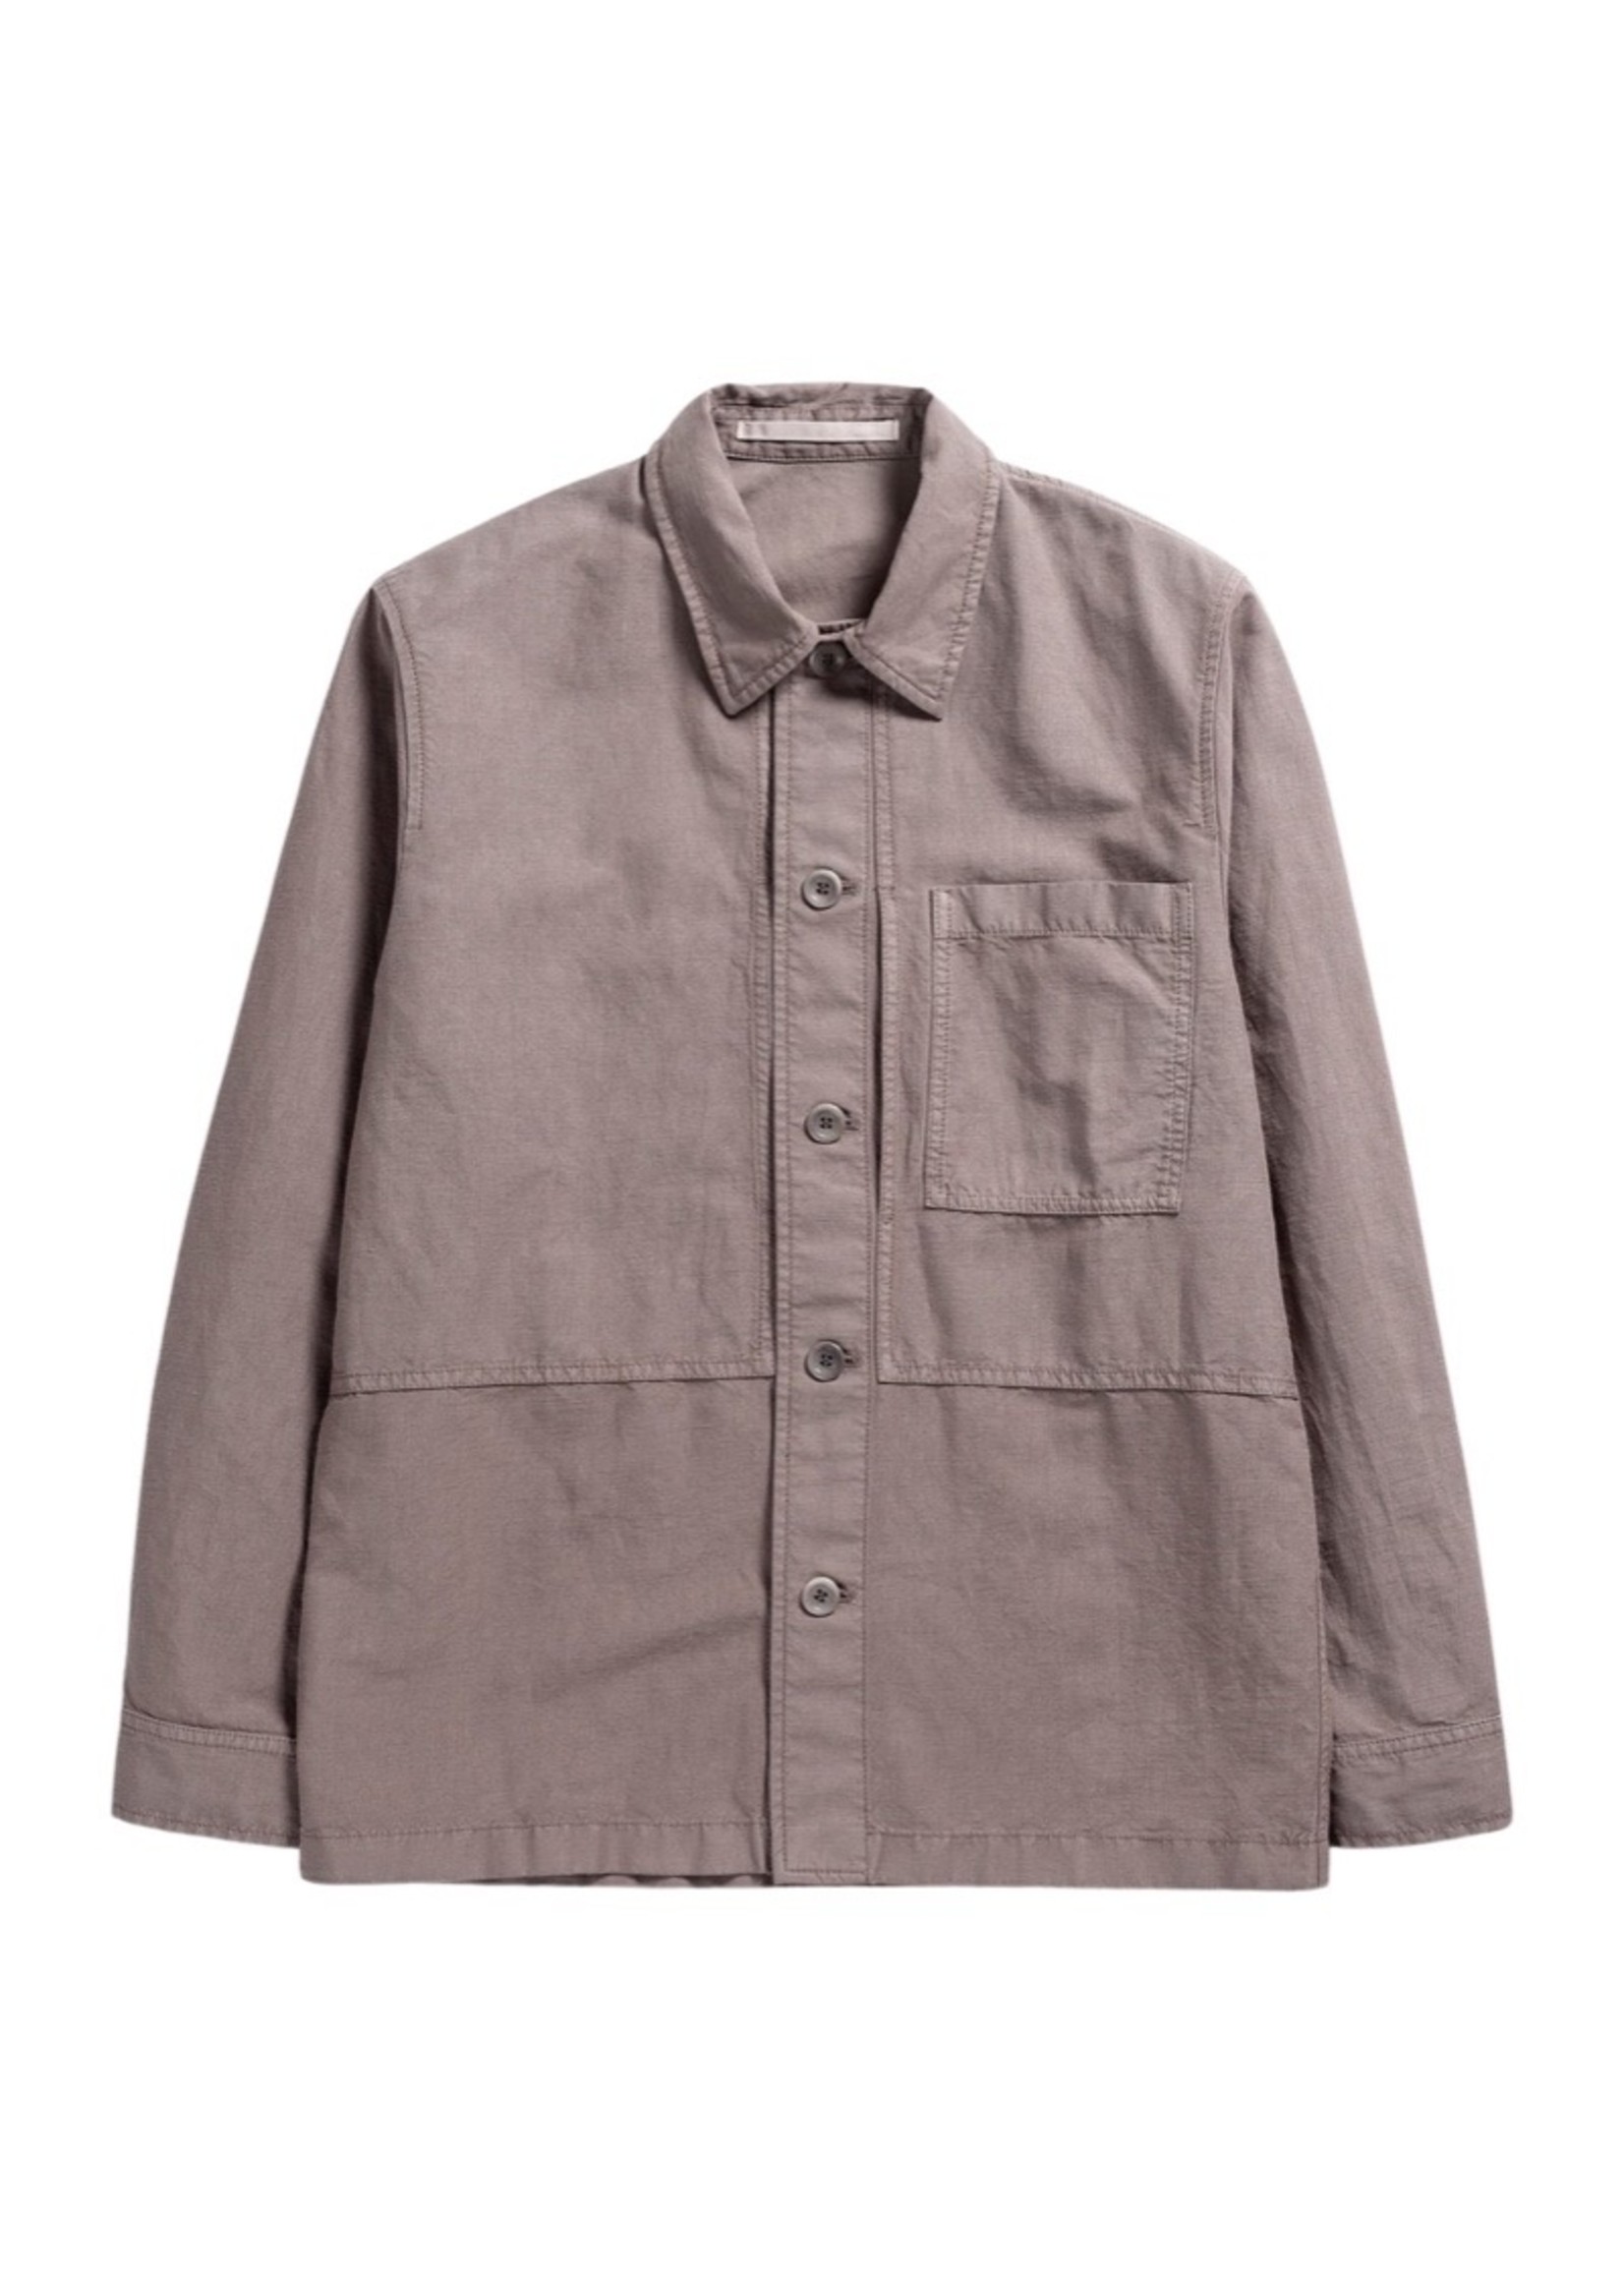 NORSE PROJECTS KYLE COTTON LINEN OVERSHIRT